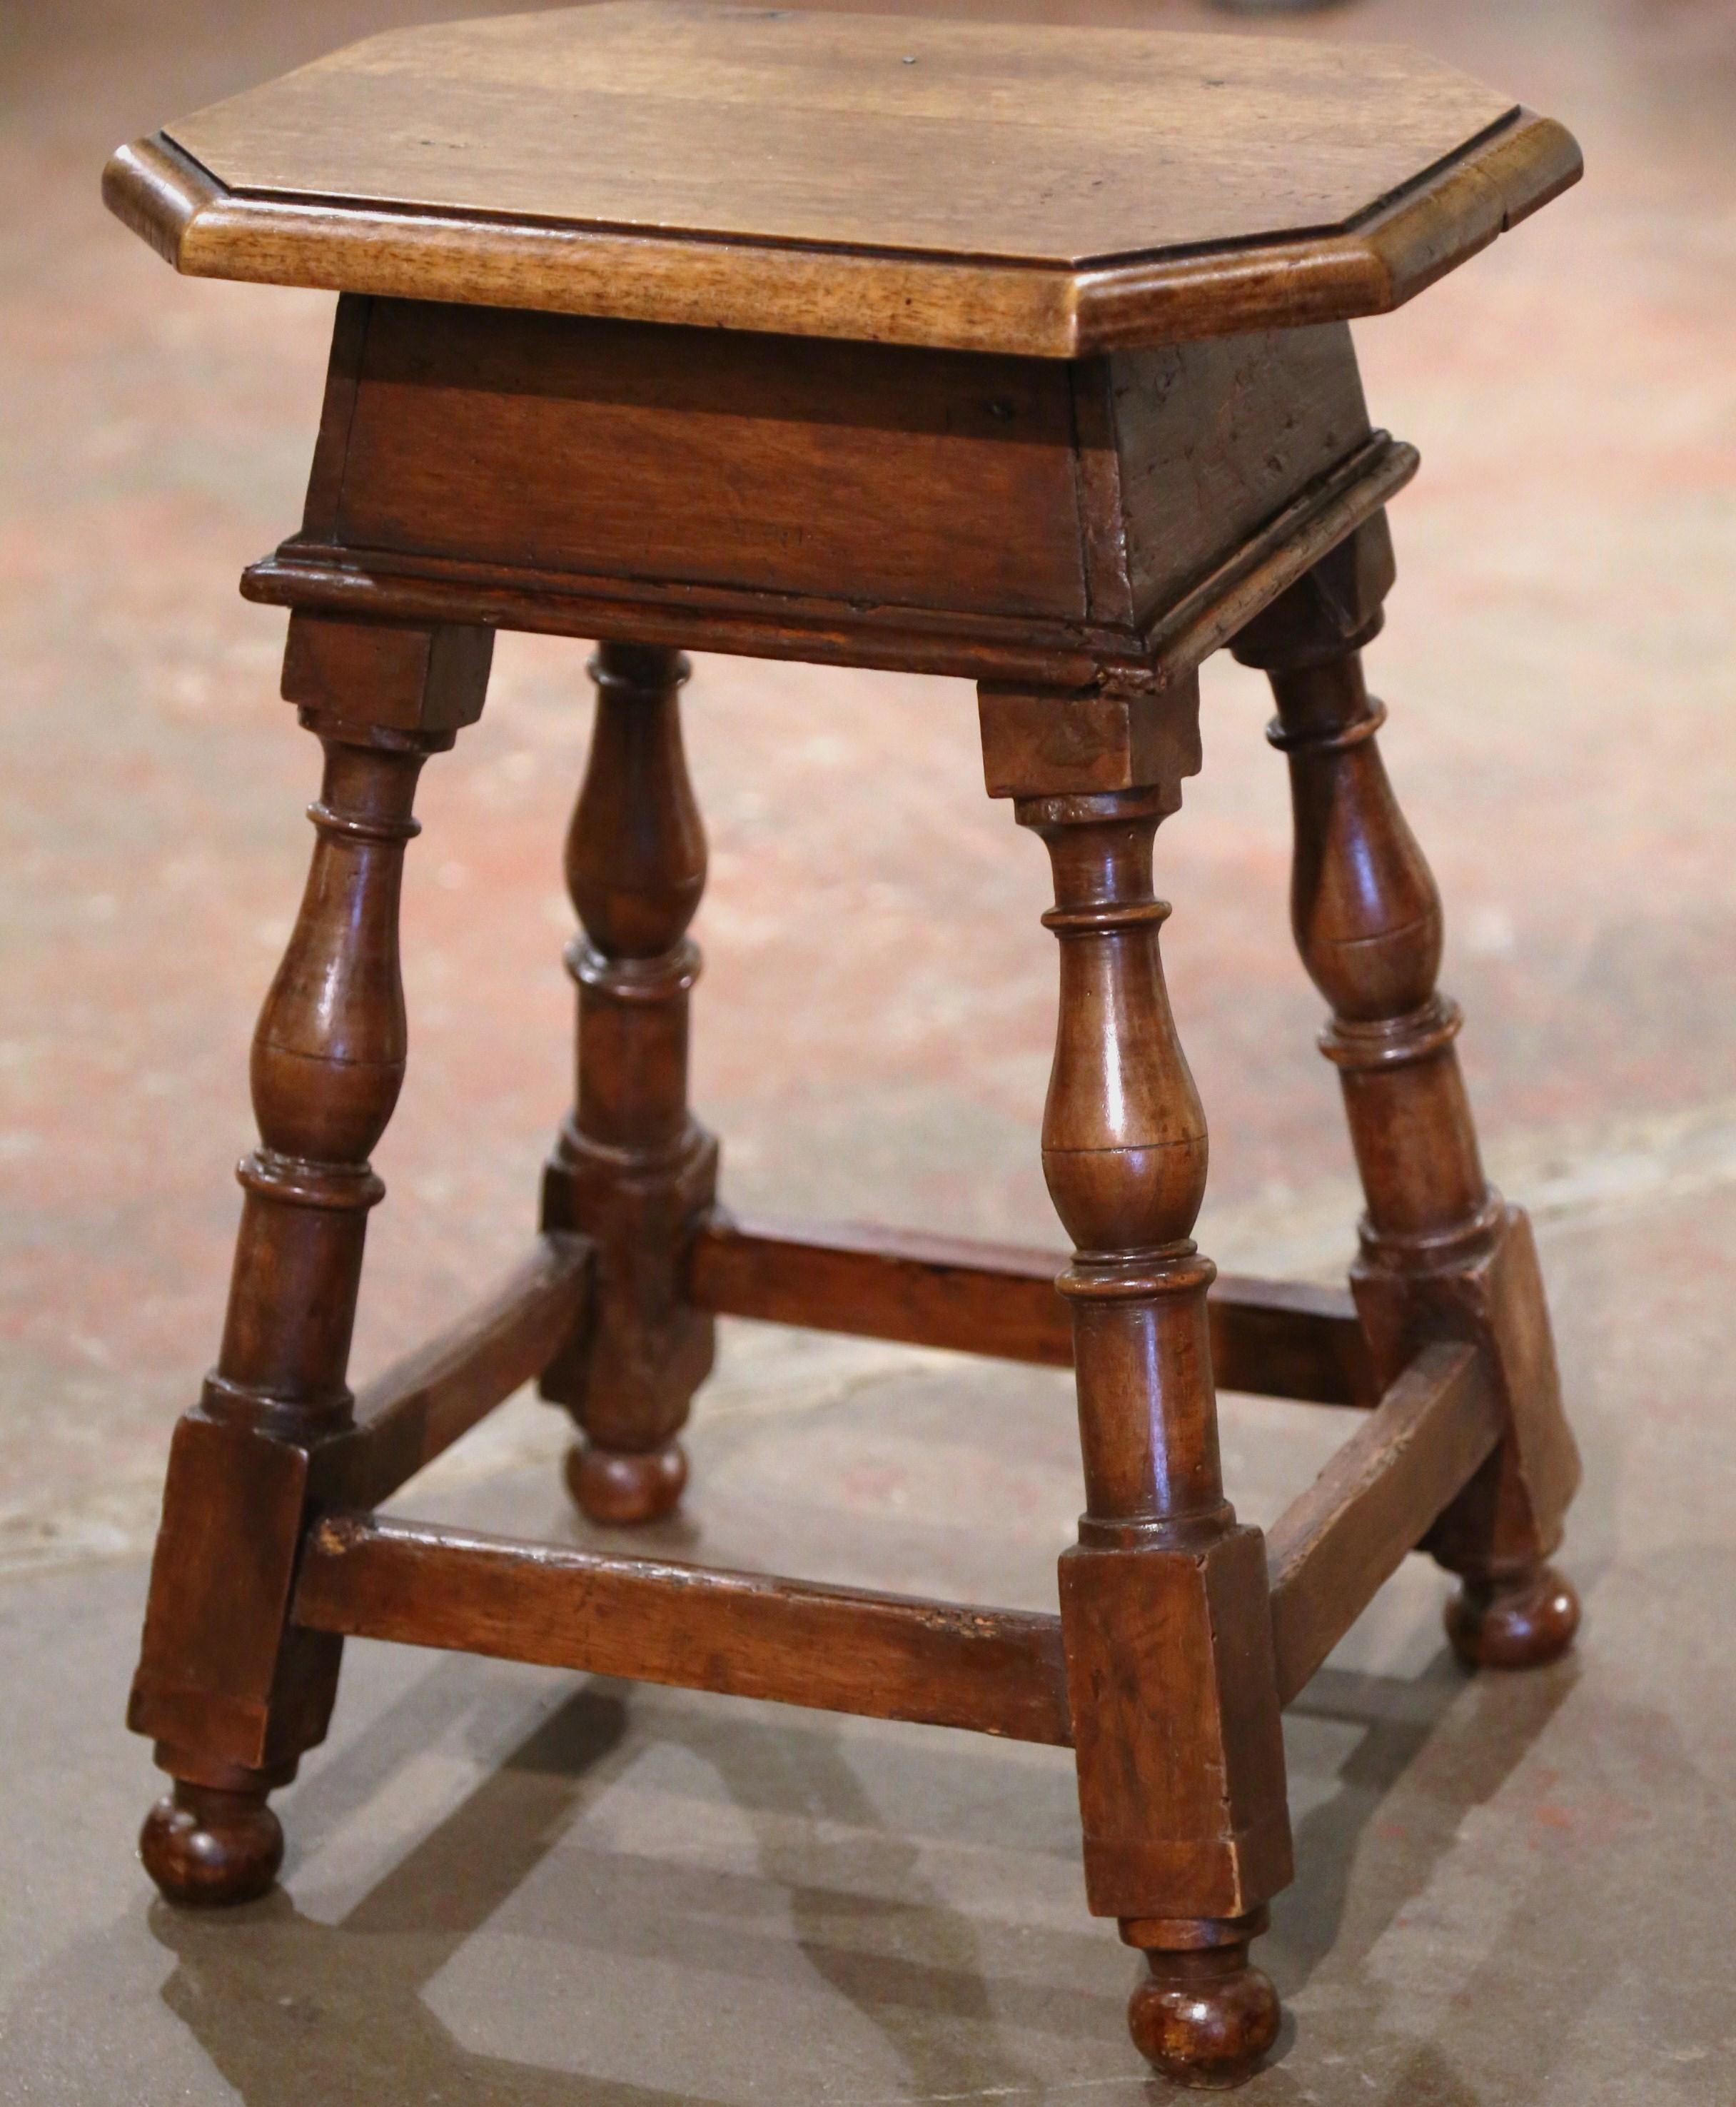 This elegant antique stool was created in Northern France, circa 1870. Built of walnut and octagonal in shape, the seating stands on four turned legs connected with a sturdy stretcher at the bottom. The rustic Louis XIII style stool is in excellent